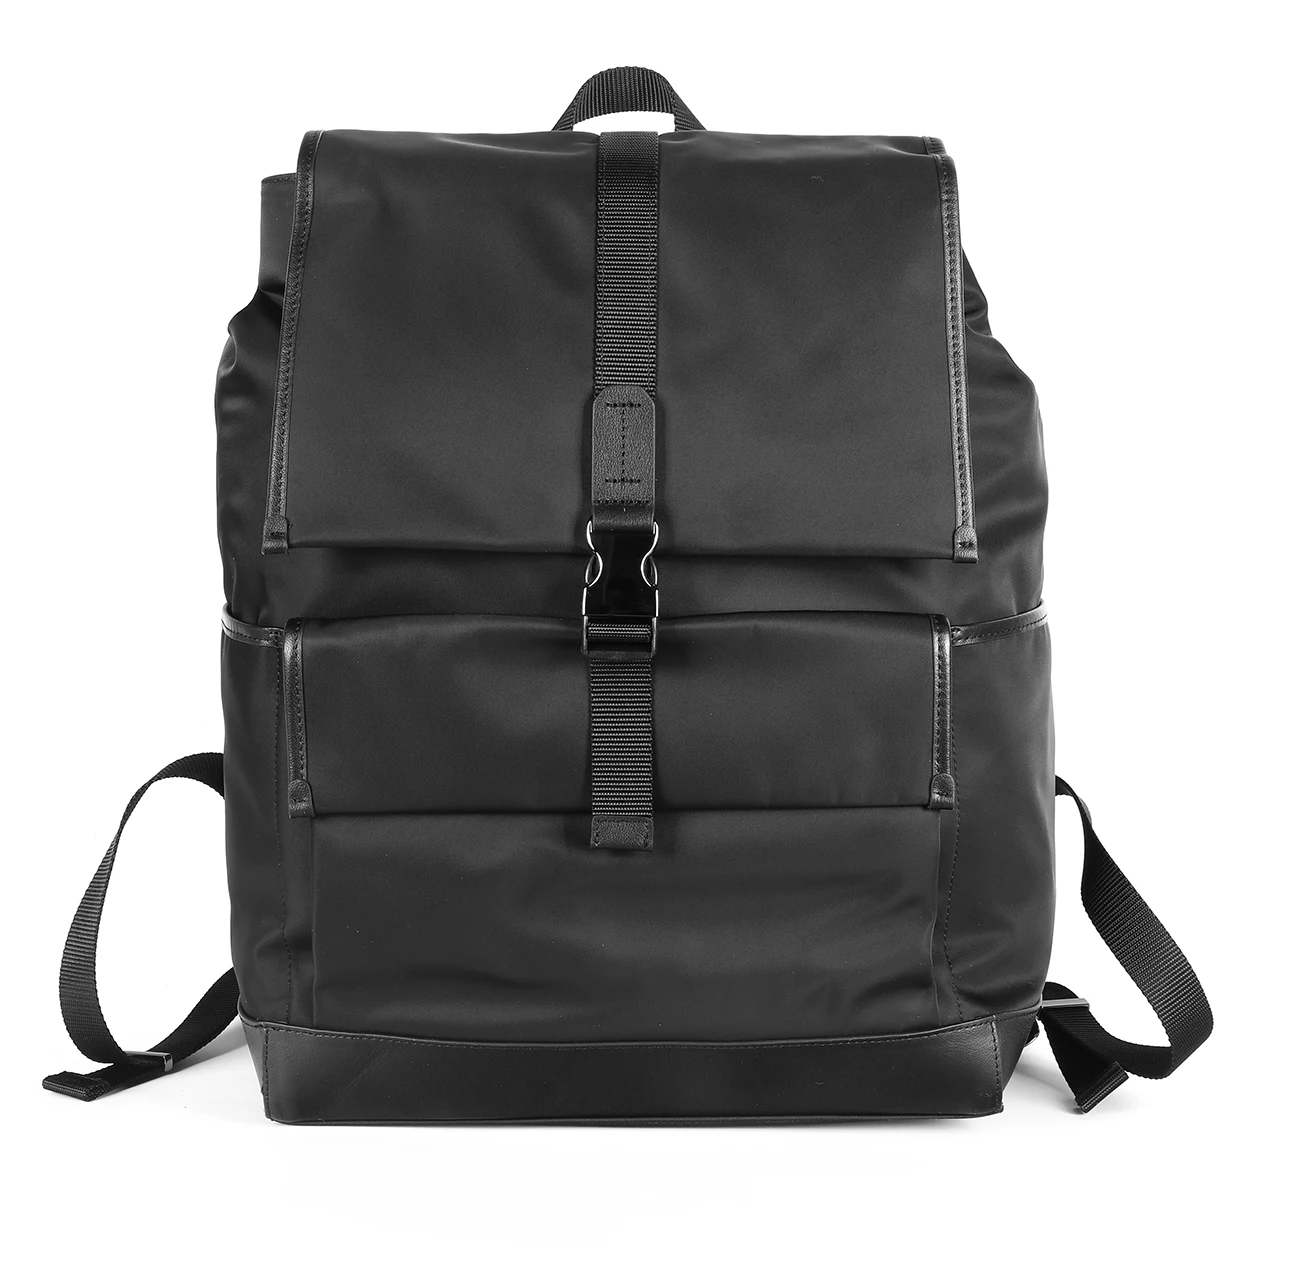 OEM Picnic Backpack Camera For Boys And Girls Daily Fashion School Bags Backpack